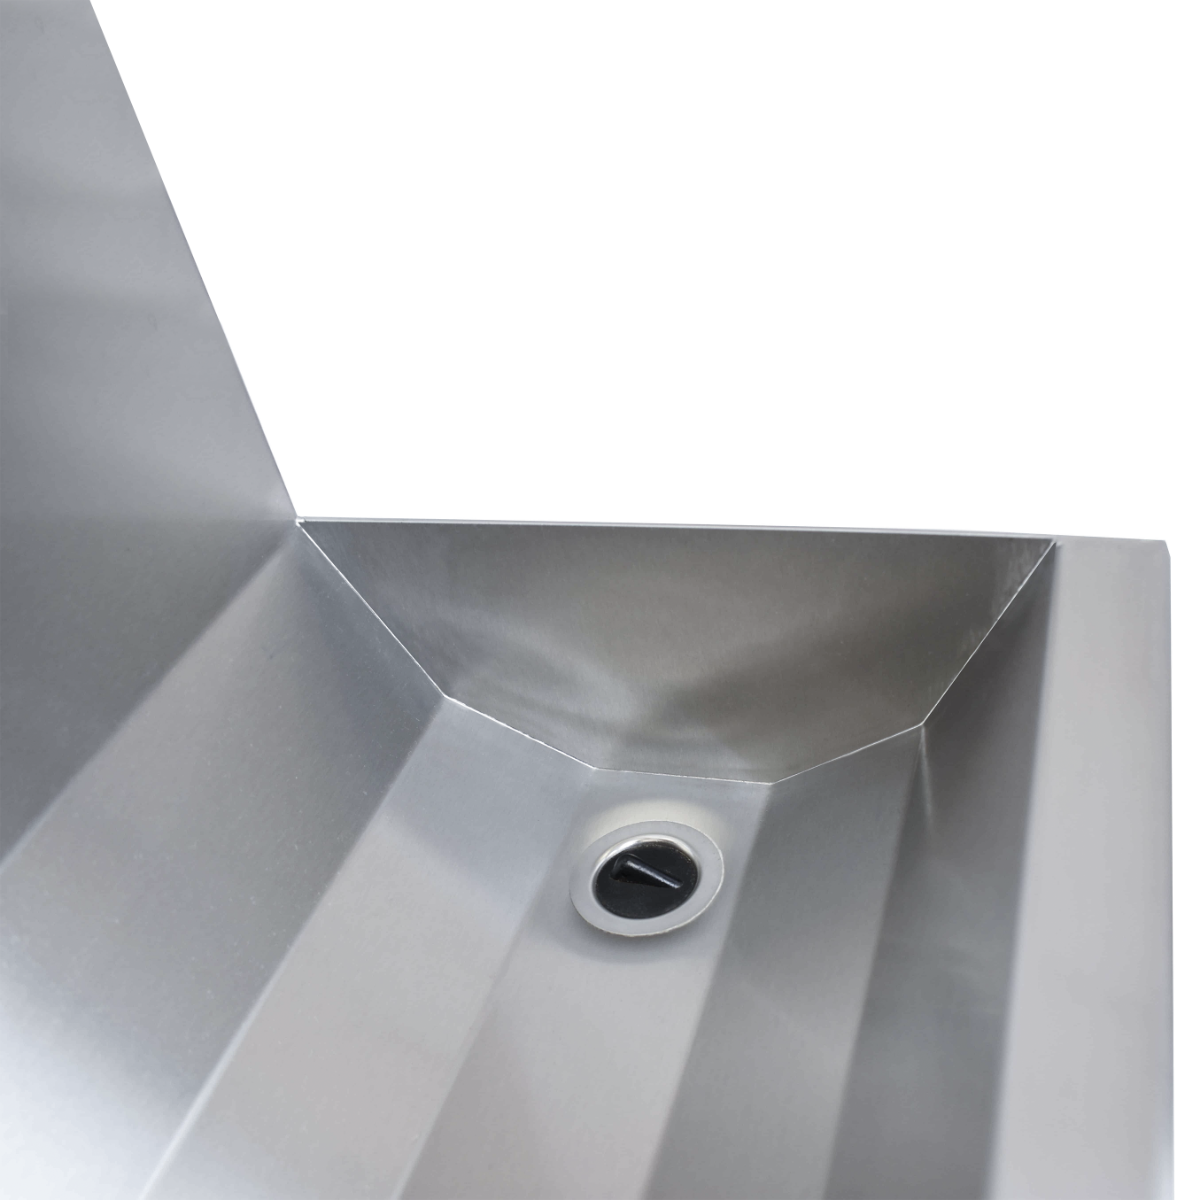 Stainless steel four station knee operated wash trough